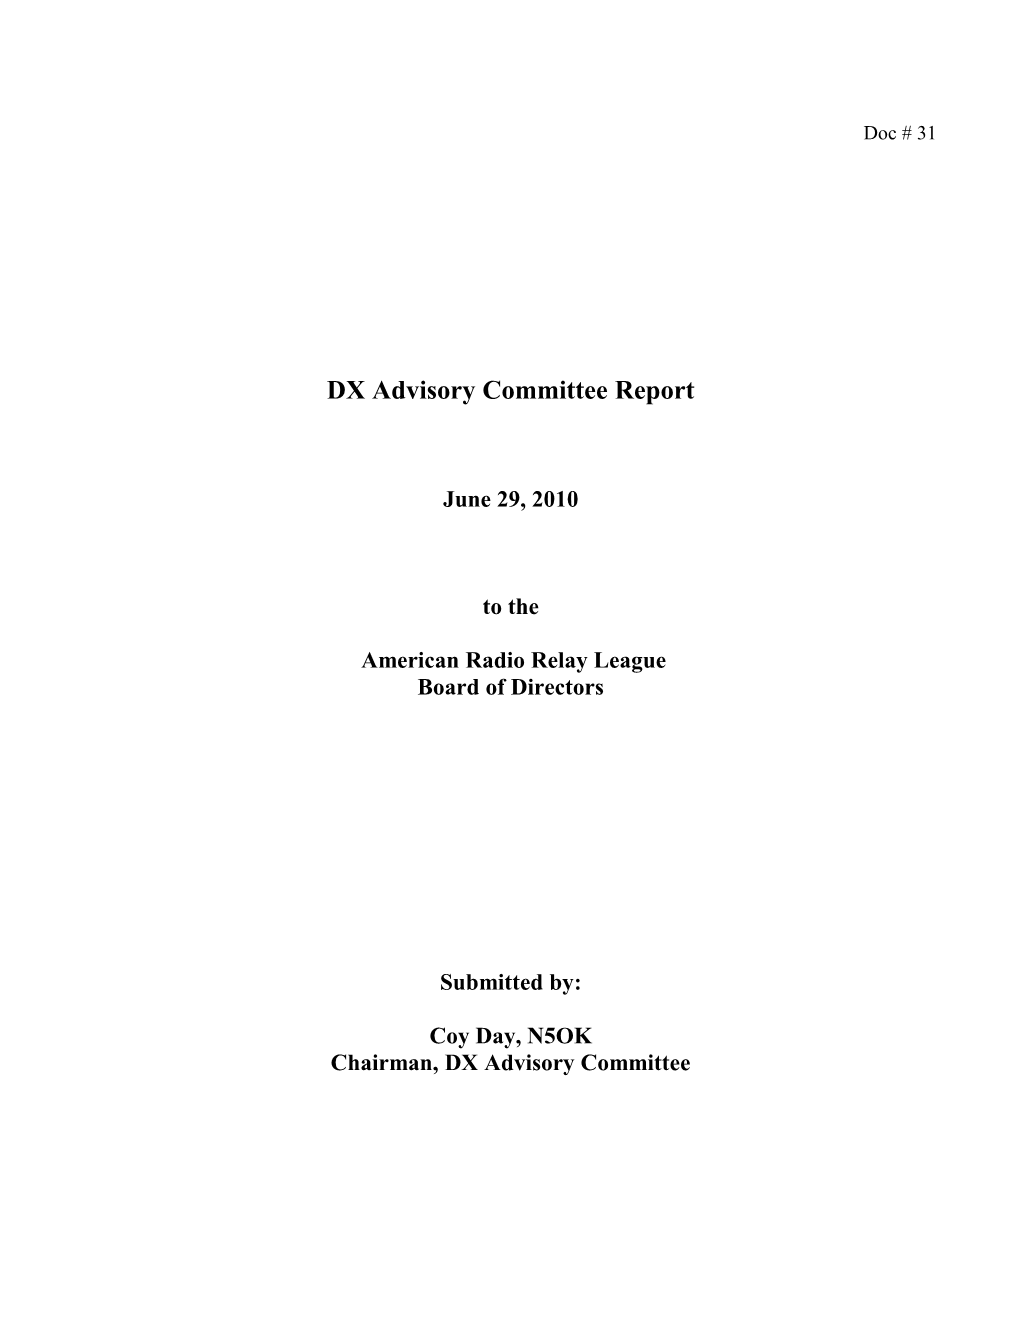 DX Advisory Committee Annual Report